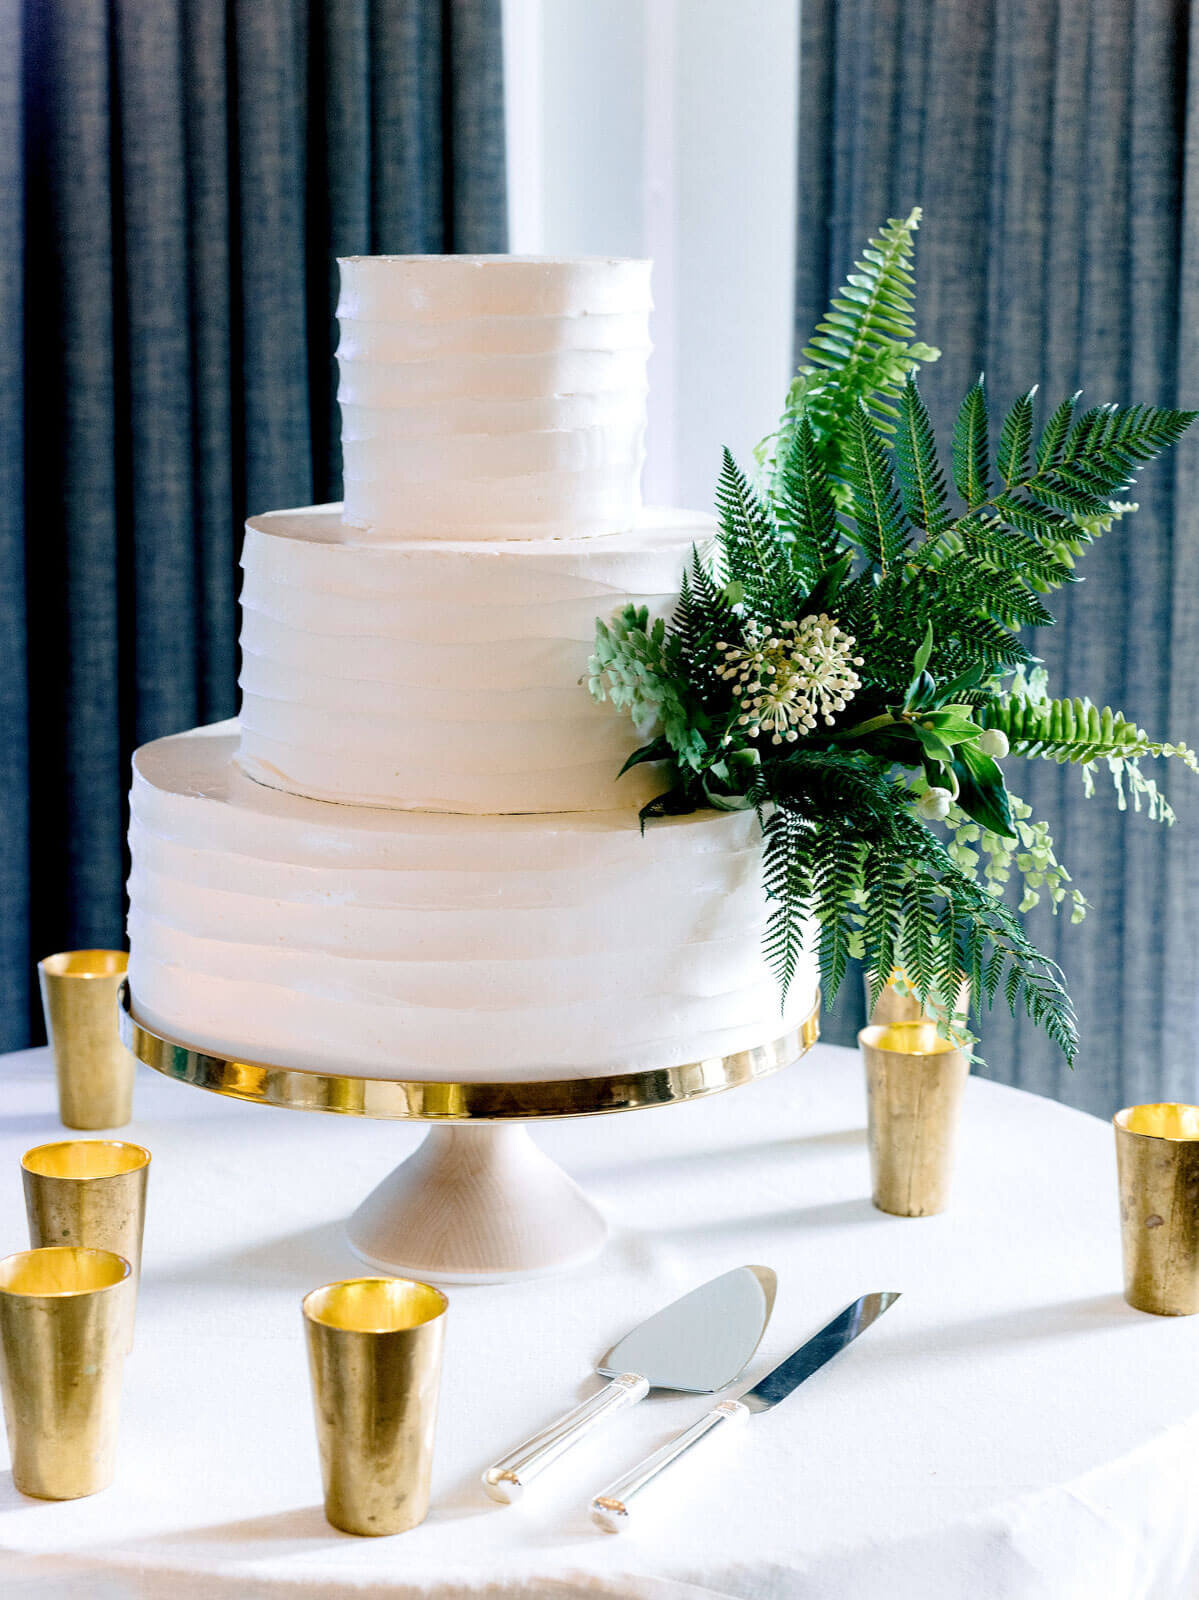 A three-layer, white wedding cake with green ferns, in Montage at Palmetto Bluff. Destination Wedding Image by Jenny Fu Studio